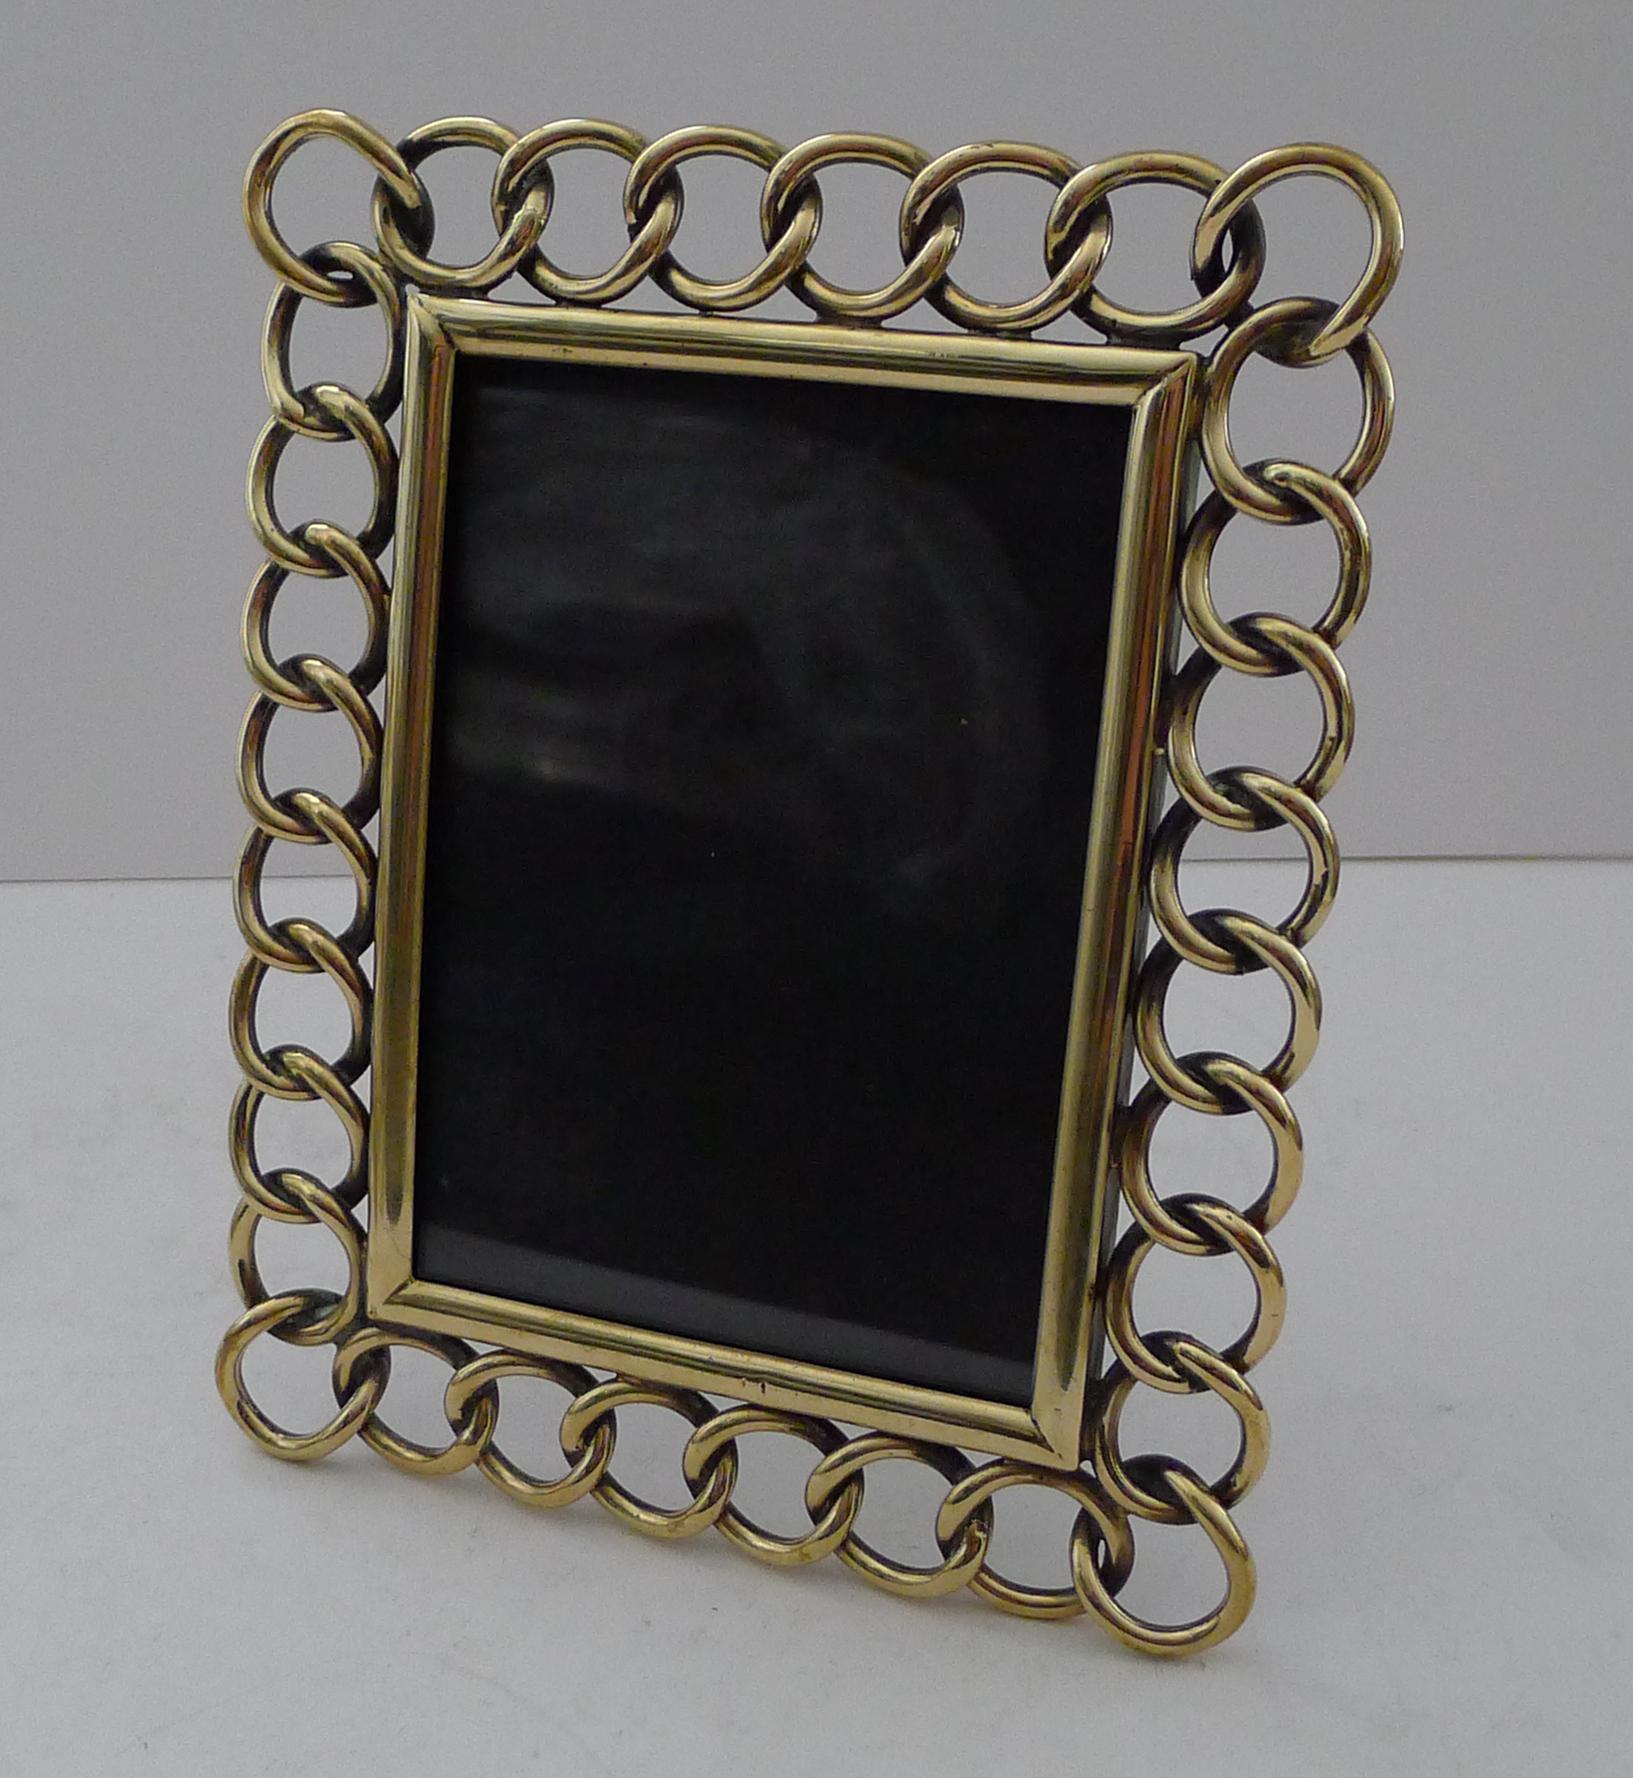 A good sized late Victorian picture frame created from a series of heavily cast intertwined rings, know as a 